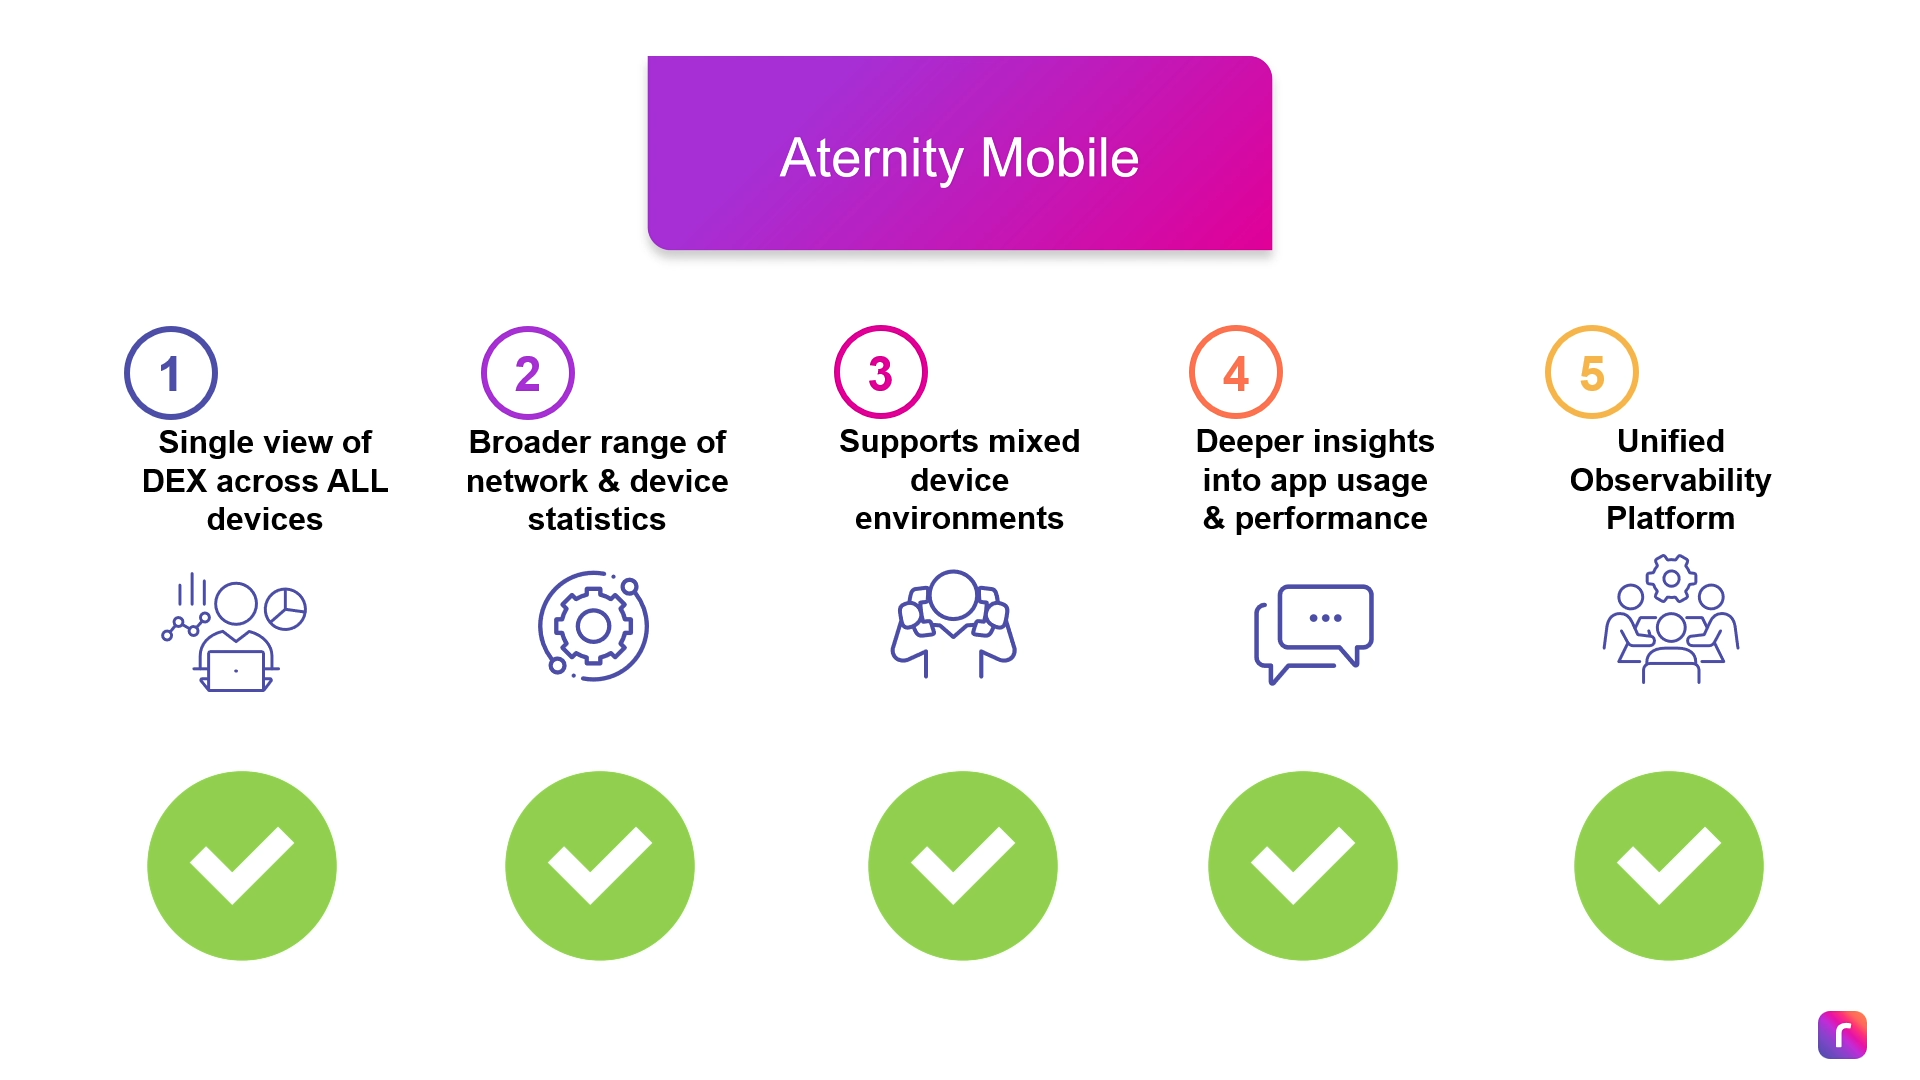 Aternity Mobile